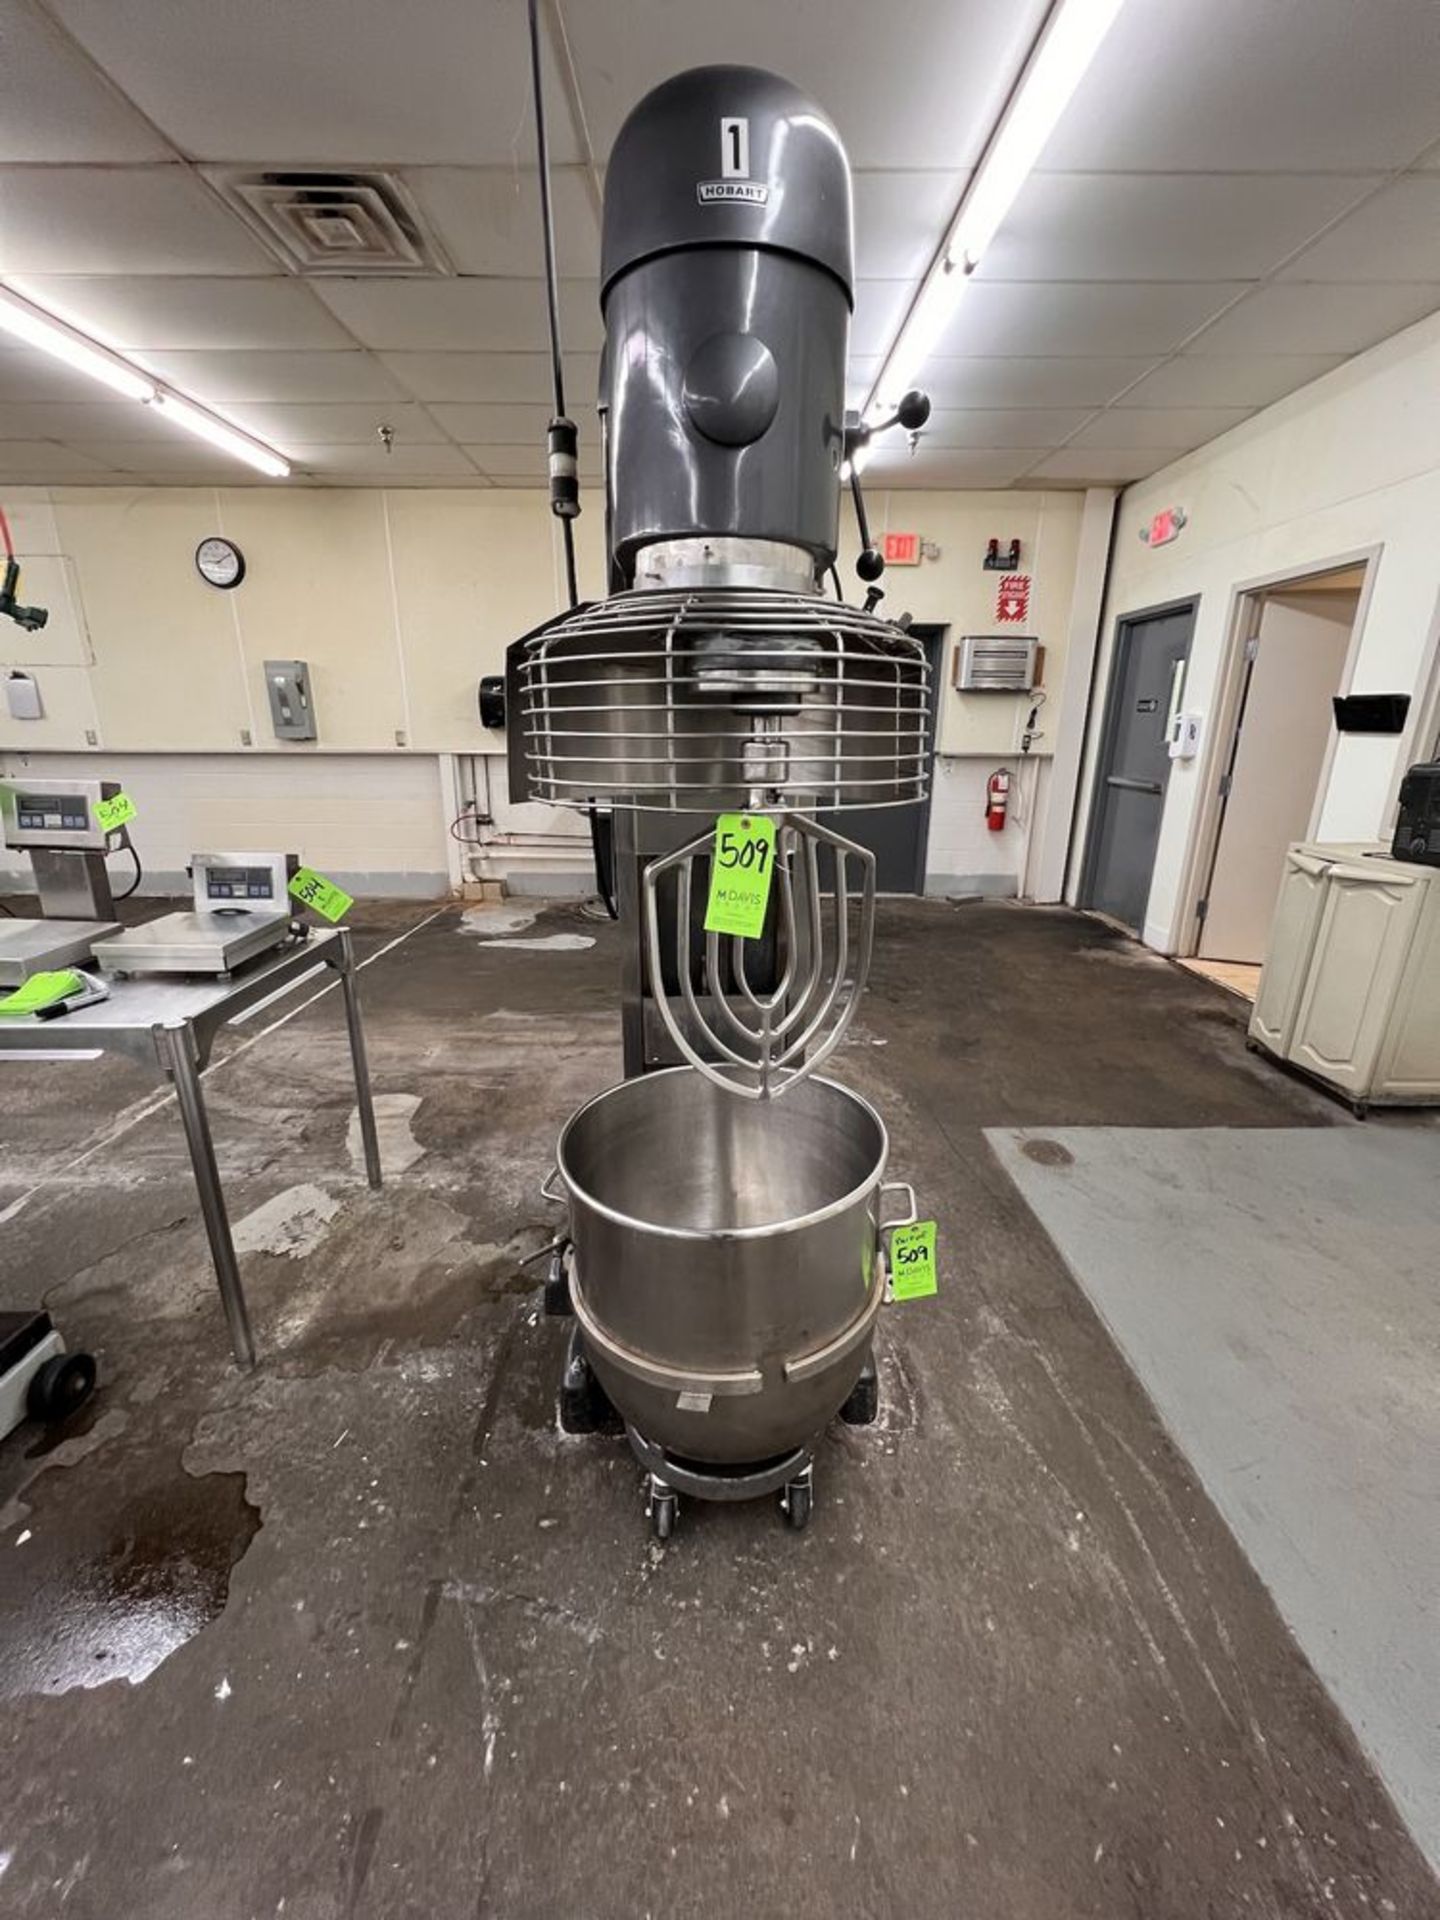 HOBART MIXER, MODEL V-1401, S/N 11-431-679, 230-460 V, INCLUDES BEATER ATTACHMENT, MIXING BOWL AND